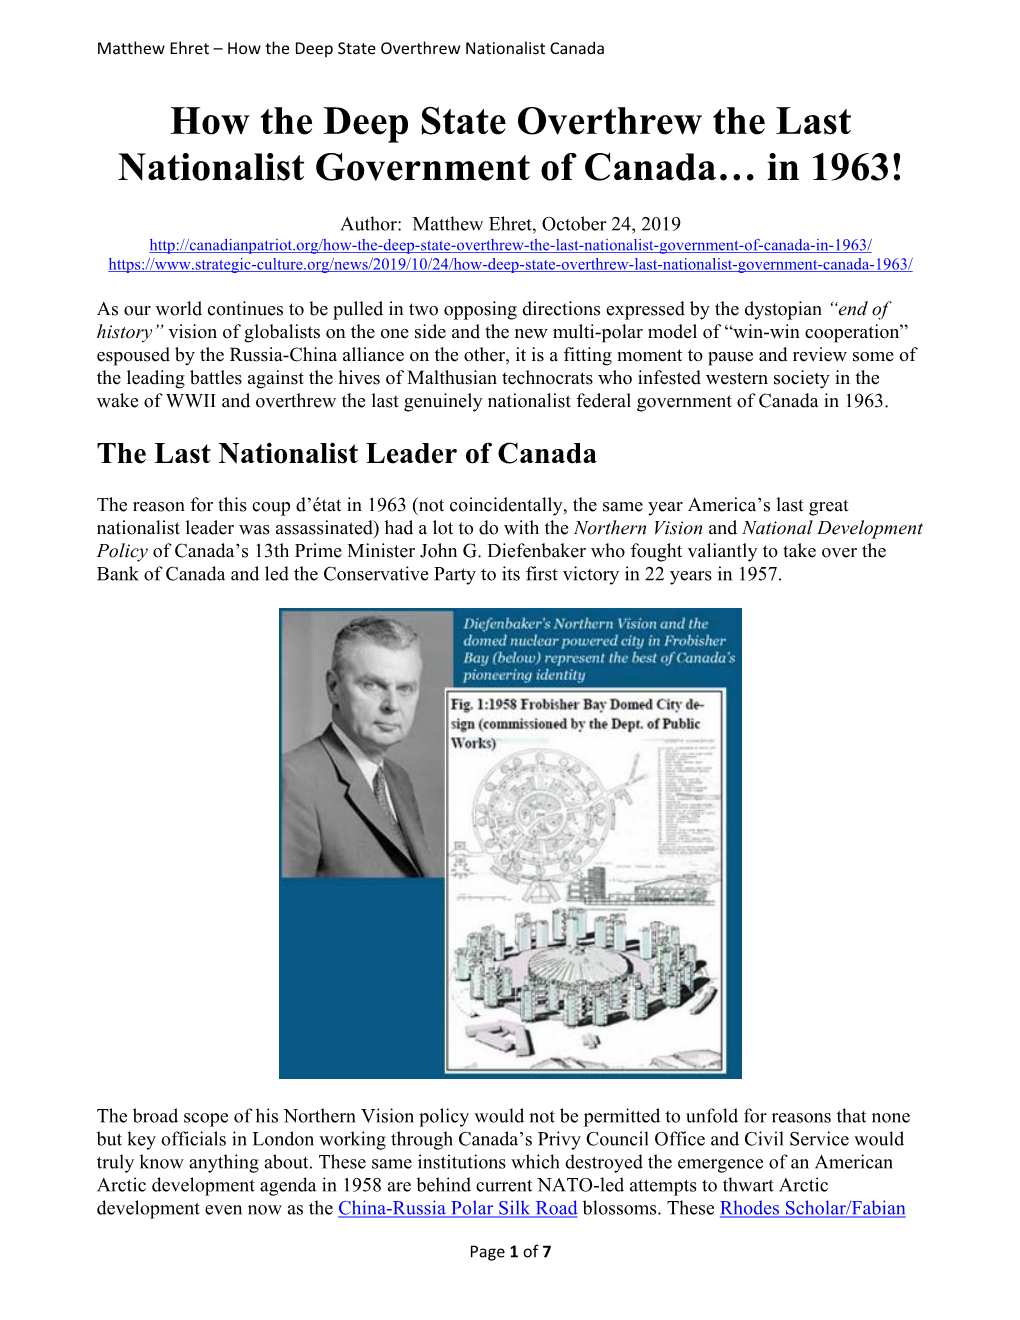 How the Deep State Overthrew the Last Nationalist Government of Canada… in 1963!